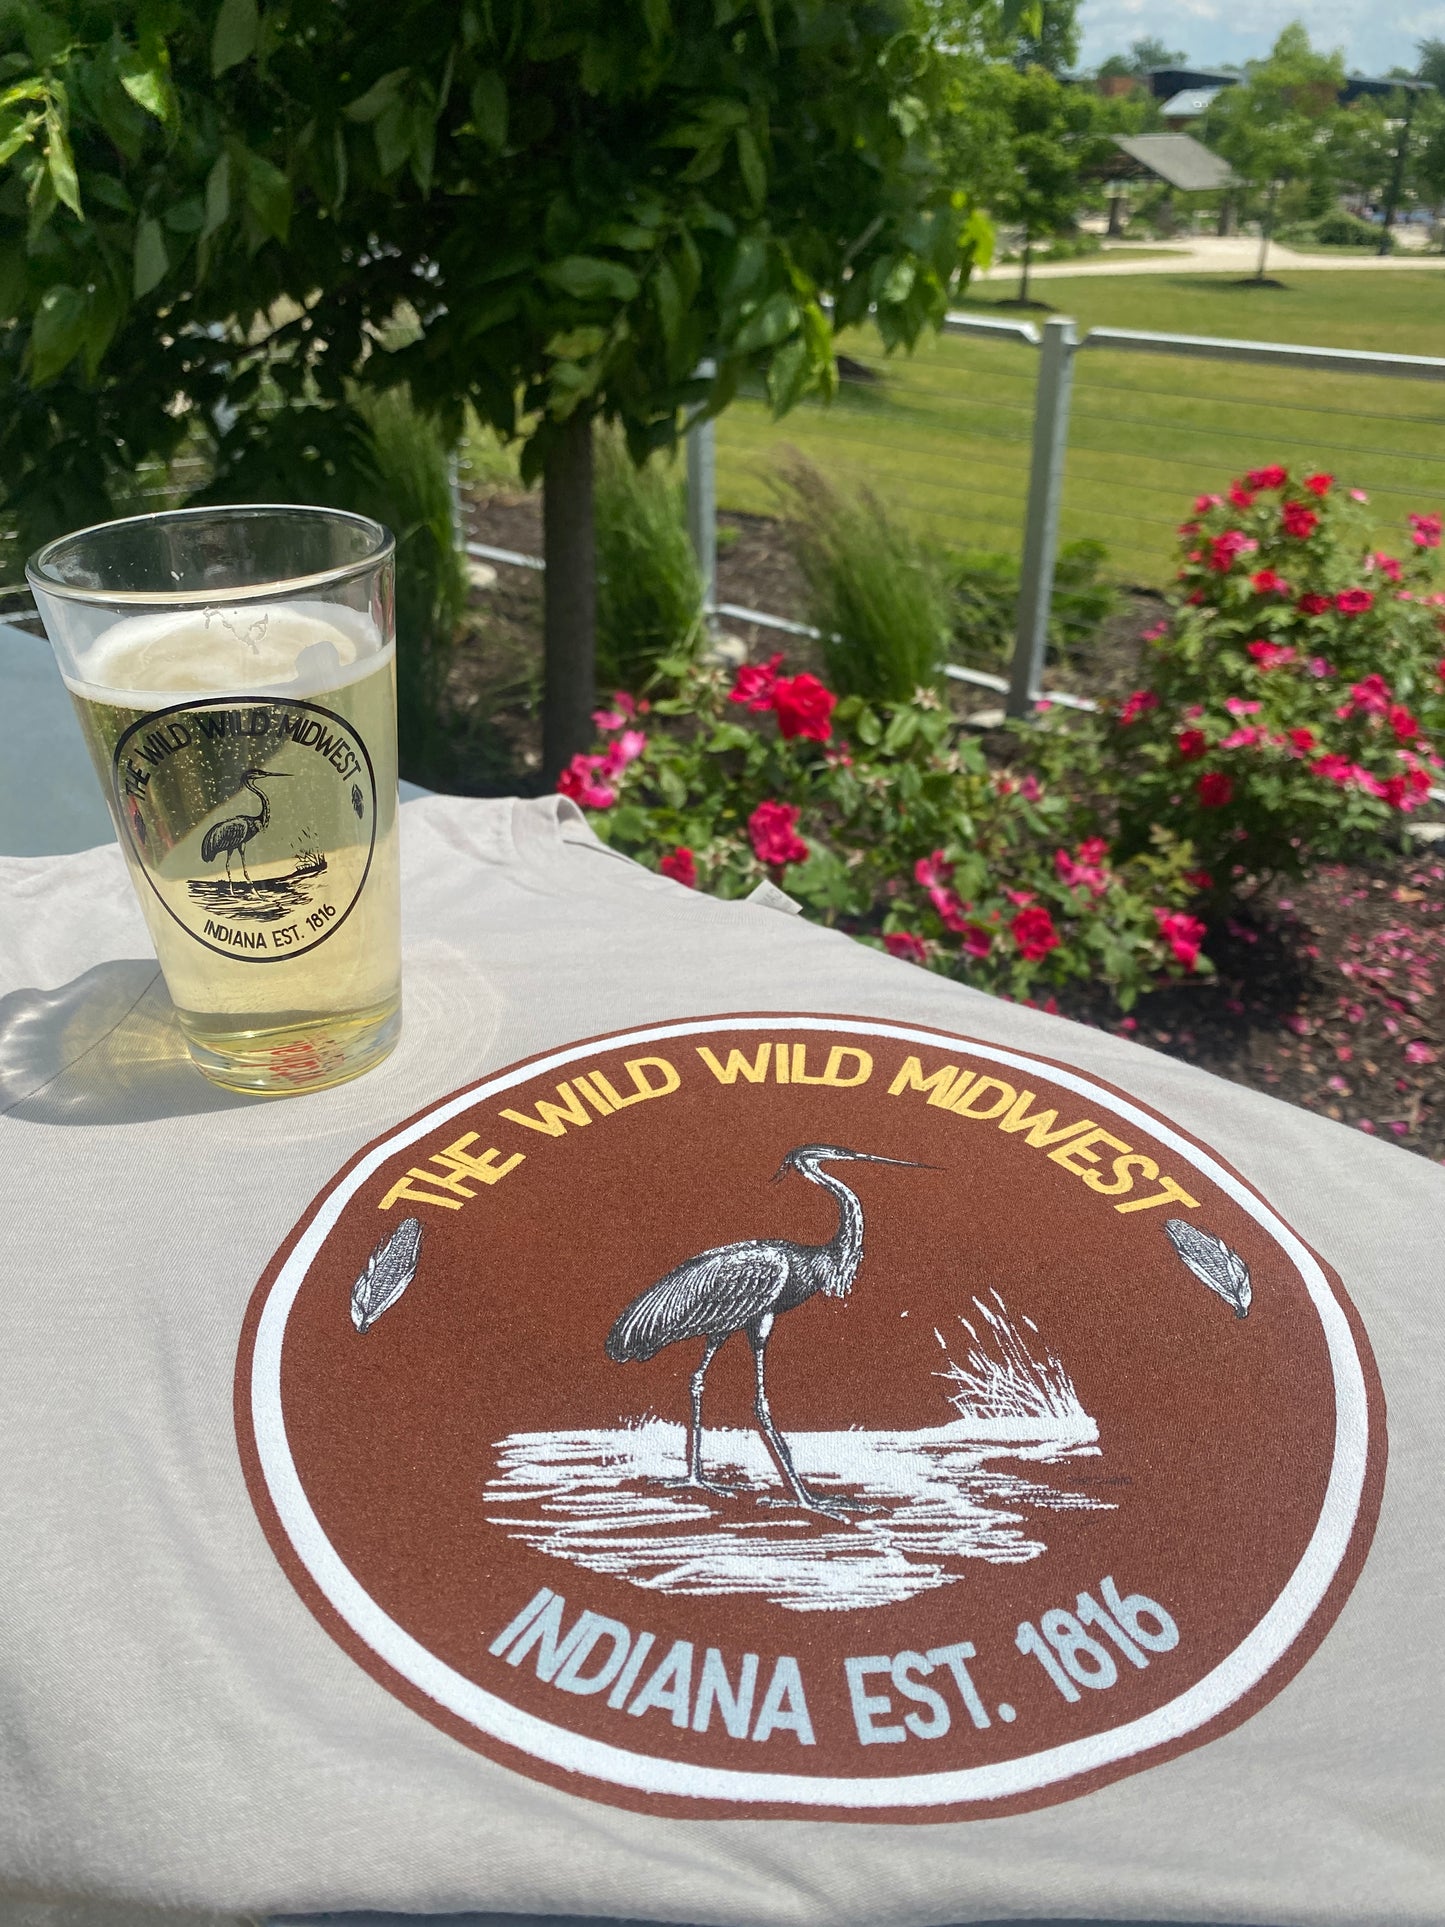 wild wild midwest blue heron shirt and pint glass